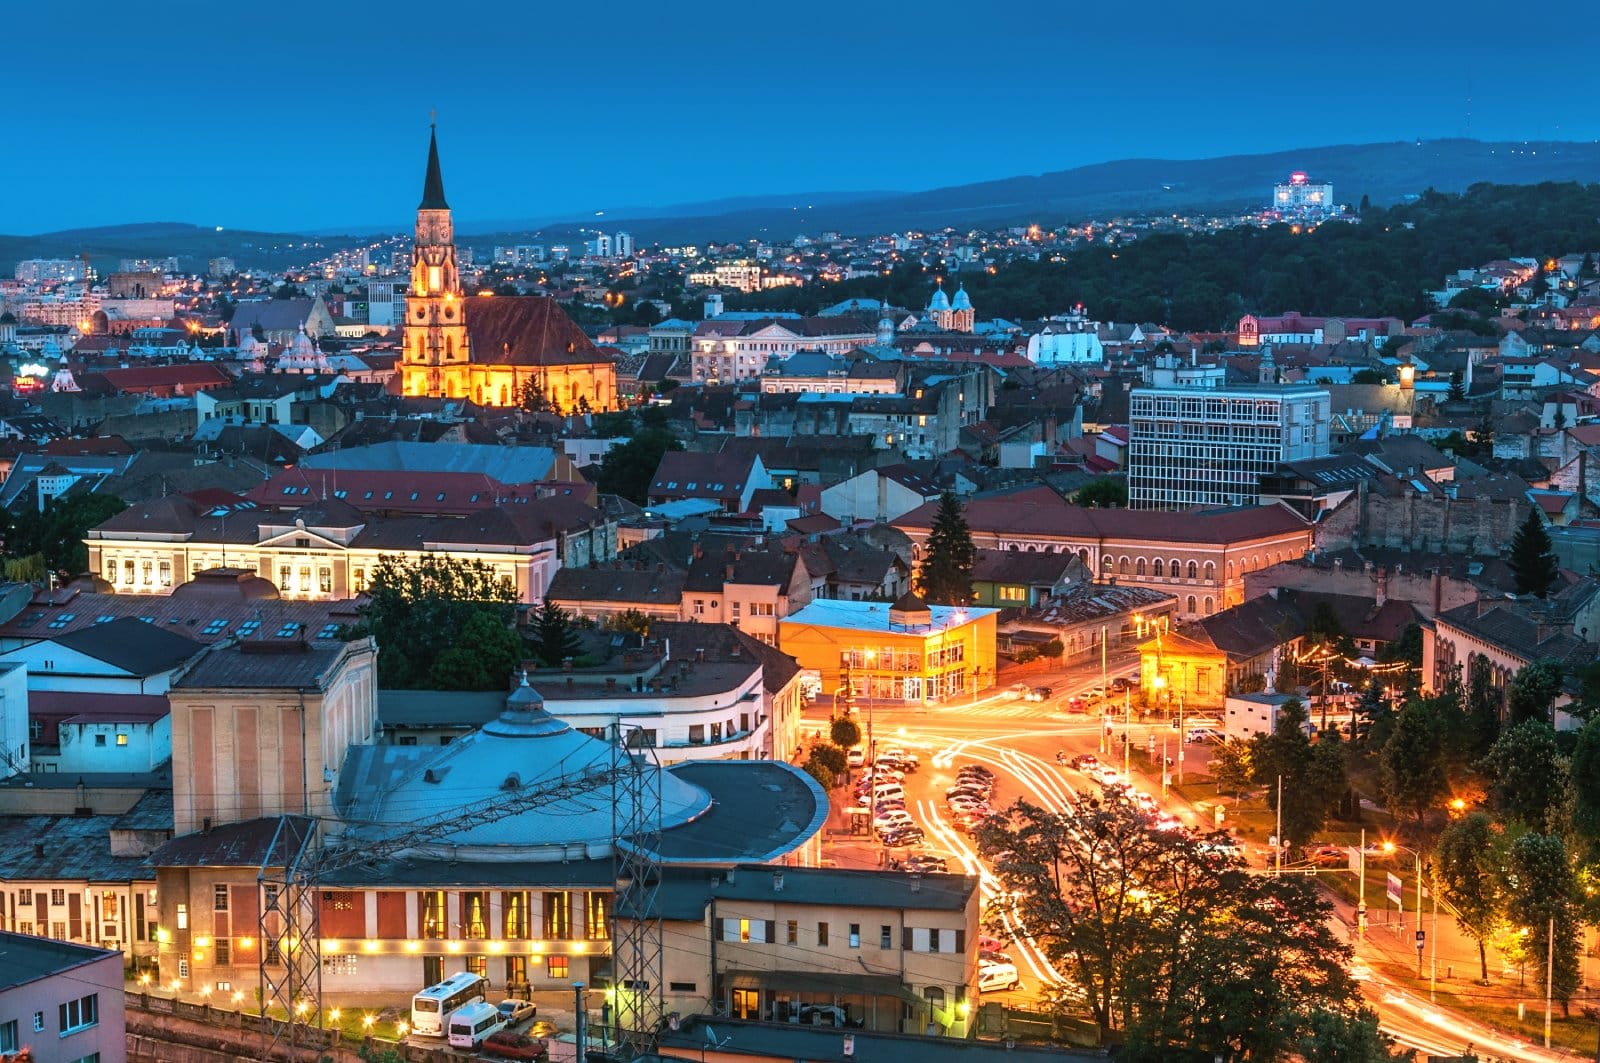 <p class="wp-caption-text">Image Credit: Shutterstock / Catalin Balau</p>  <p>Cluj-Napoca, a youthful and vibrant city, is an affordable destination with a lively cafe culture, historical attractions, and budget-friendly nightlife.</p>